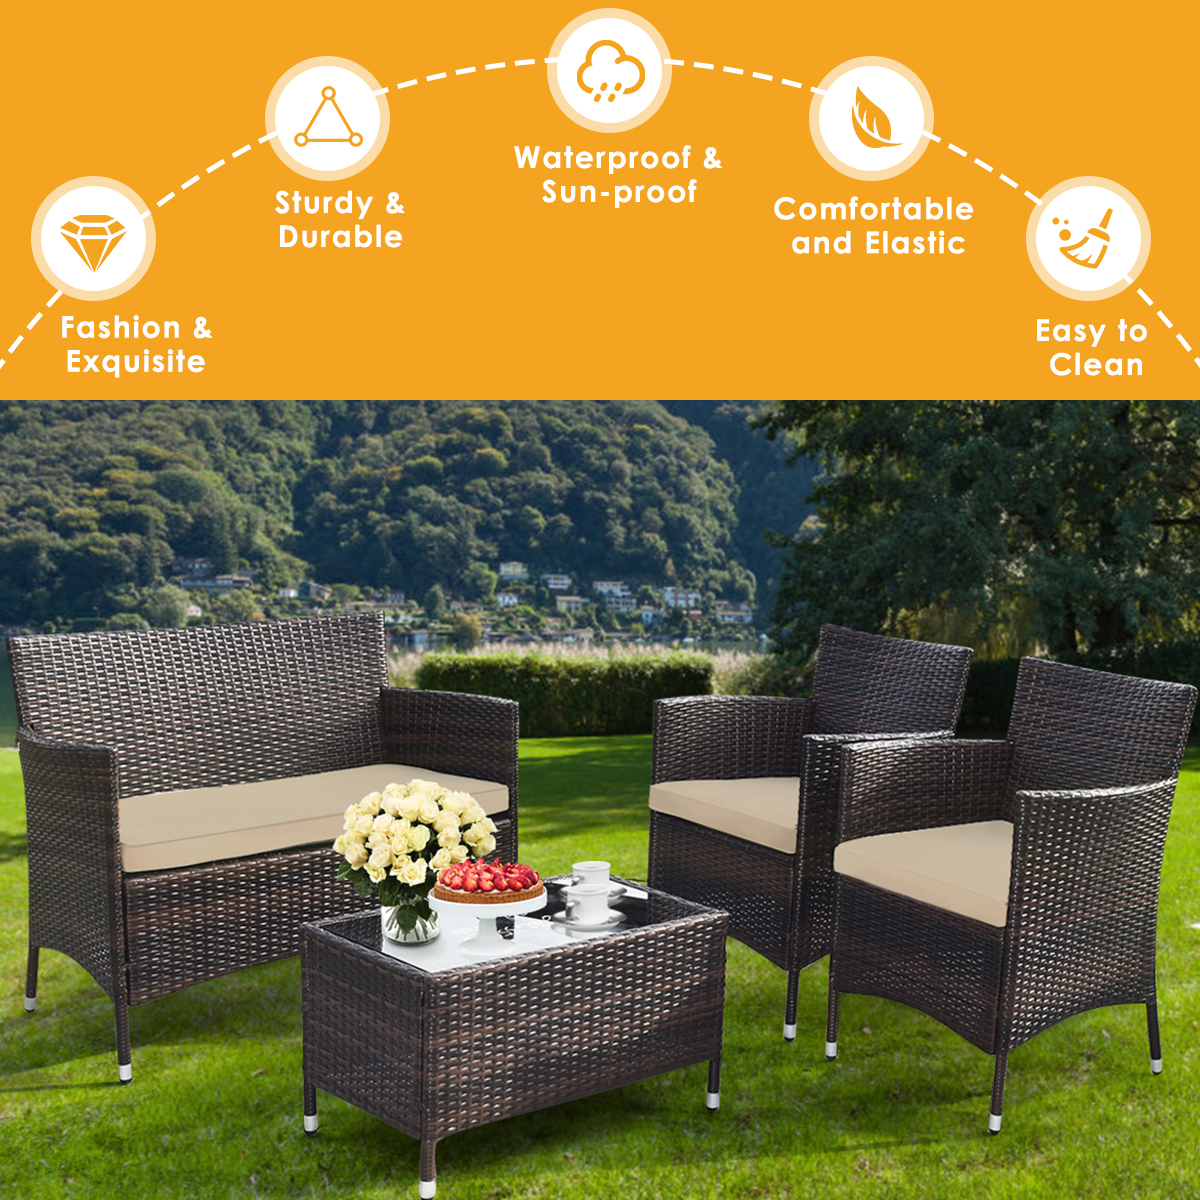 Gymax 8PCS Patio Rattan Outdoor Furniture Set w/ Cushioned Chair Loveseat Table - image 2 of 10